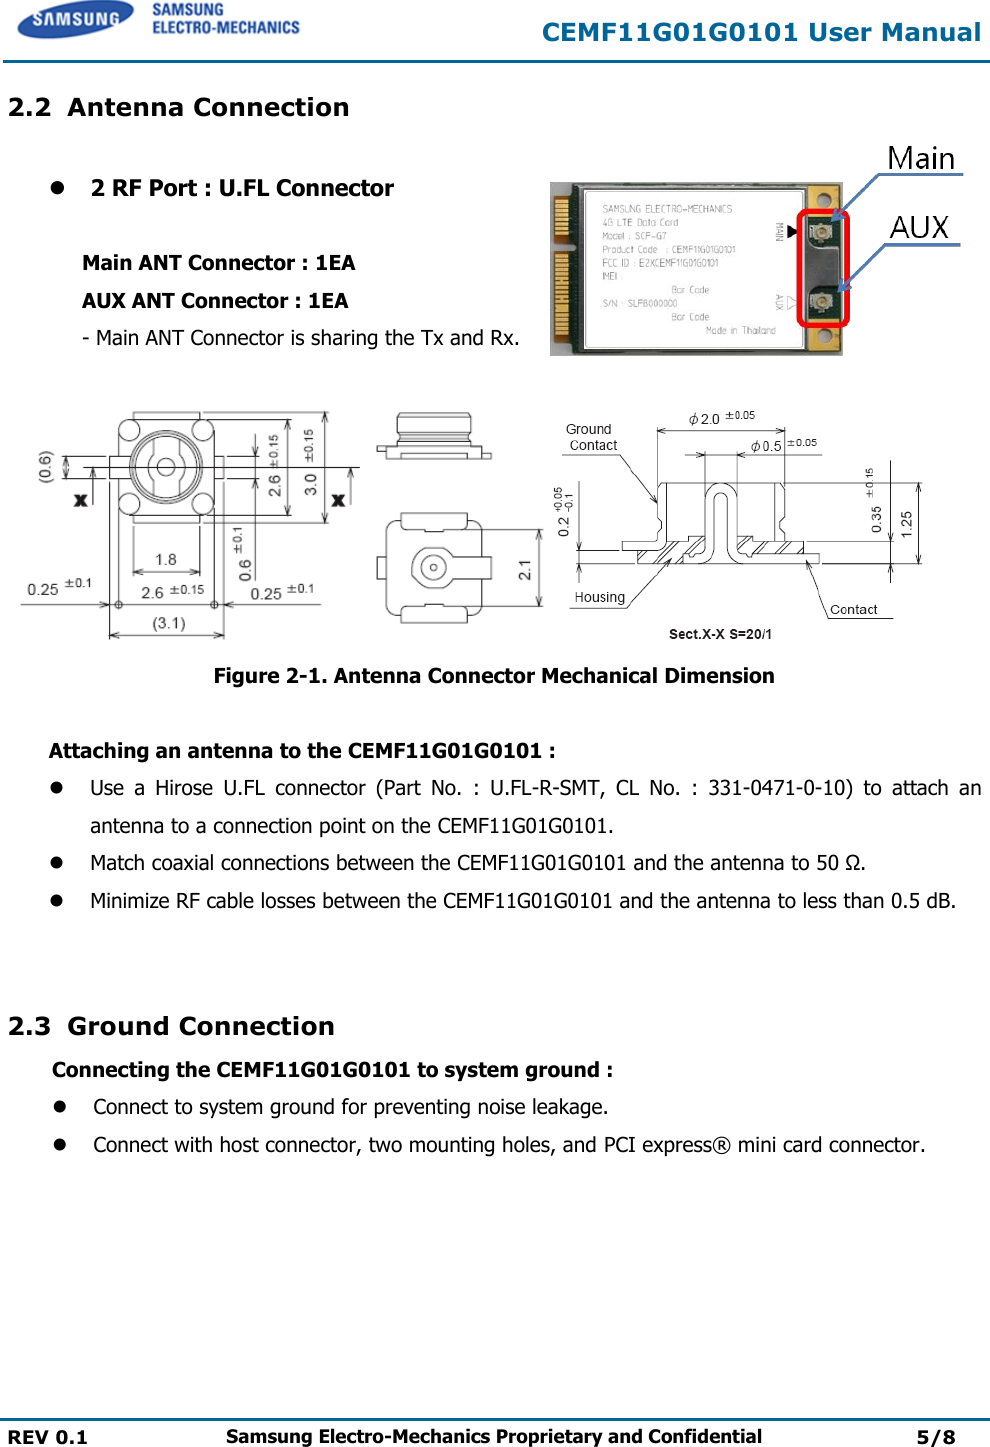  CEMF11G01G0101 User Manual  REV 0.1 Samsung Electro-Mechanics Proprietary and Confidential 5/8  2.2 Antenna Connection   2 RF Port : U.FL Connector      Main ANT Connector : 1EA AUX ANT Connector : 1EA - Main ANT Connector is sharing the Tx and Rx.      Figure 2-1. Antenna Connector Mechanical Dimension  Attaching an antenna to the CEMF11G01G0101 :   Use  a  Hirose  U.FL  connector  (Part  No.  :  U.FL-R-SMT,  CL  No.  :  331-0471-0-10)  to  attach  an antenna to a connection point on the CEMF11G01G0101.  Match coaxial connections between the CEMF11G01G0101 and the antenna to 50 Ω.  Minimize RF cable losses between the CEMF11G01G0101 and the antenna to less than 0.5 dB.   2.3 Ground Connection Connecting the CEMF11G01G0101 to system ground :  Connect to system ground for preventing noise leakage.  Connect with host connector, two mounting holes, and PCI express®  mini card connector.     